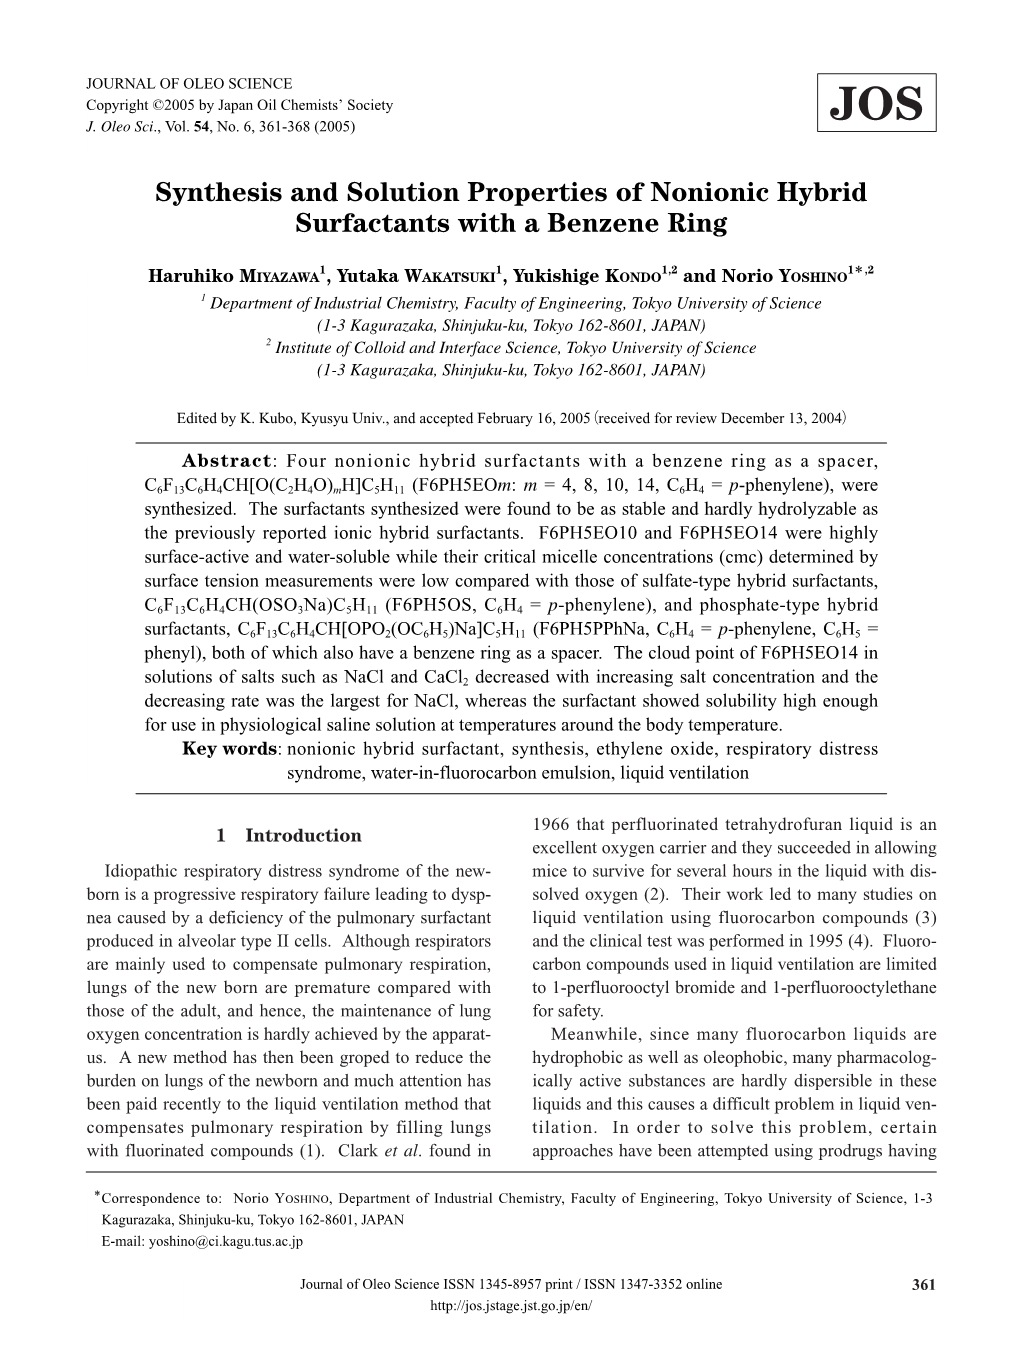 Synthesis and Solution Properties of Nonionic Hybrid Surfactants with a Benzene Ring